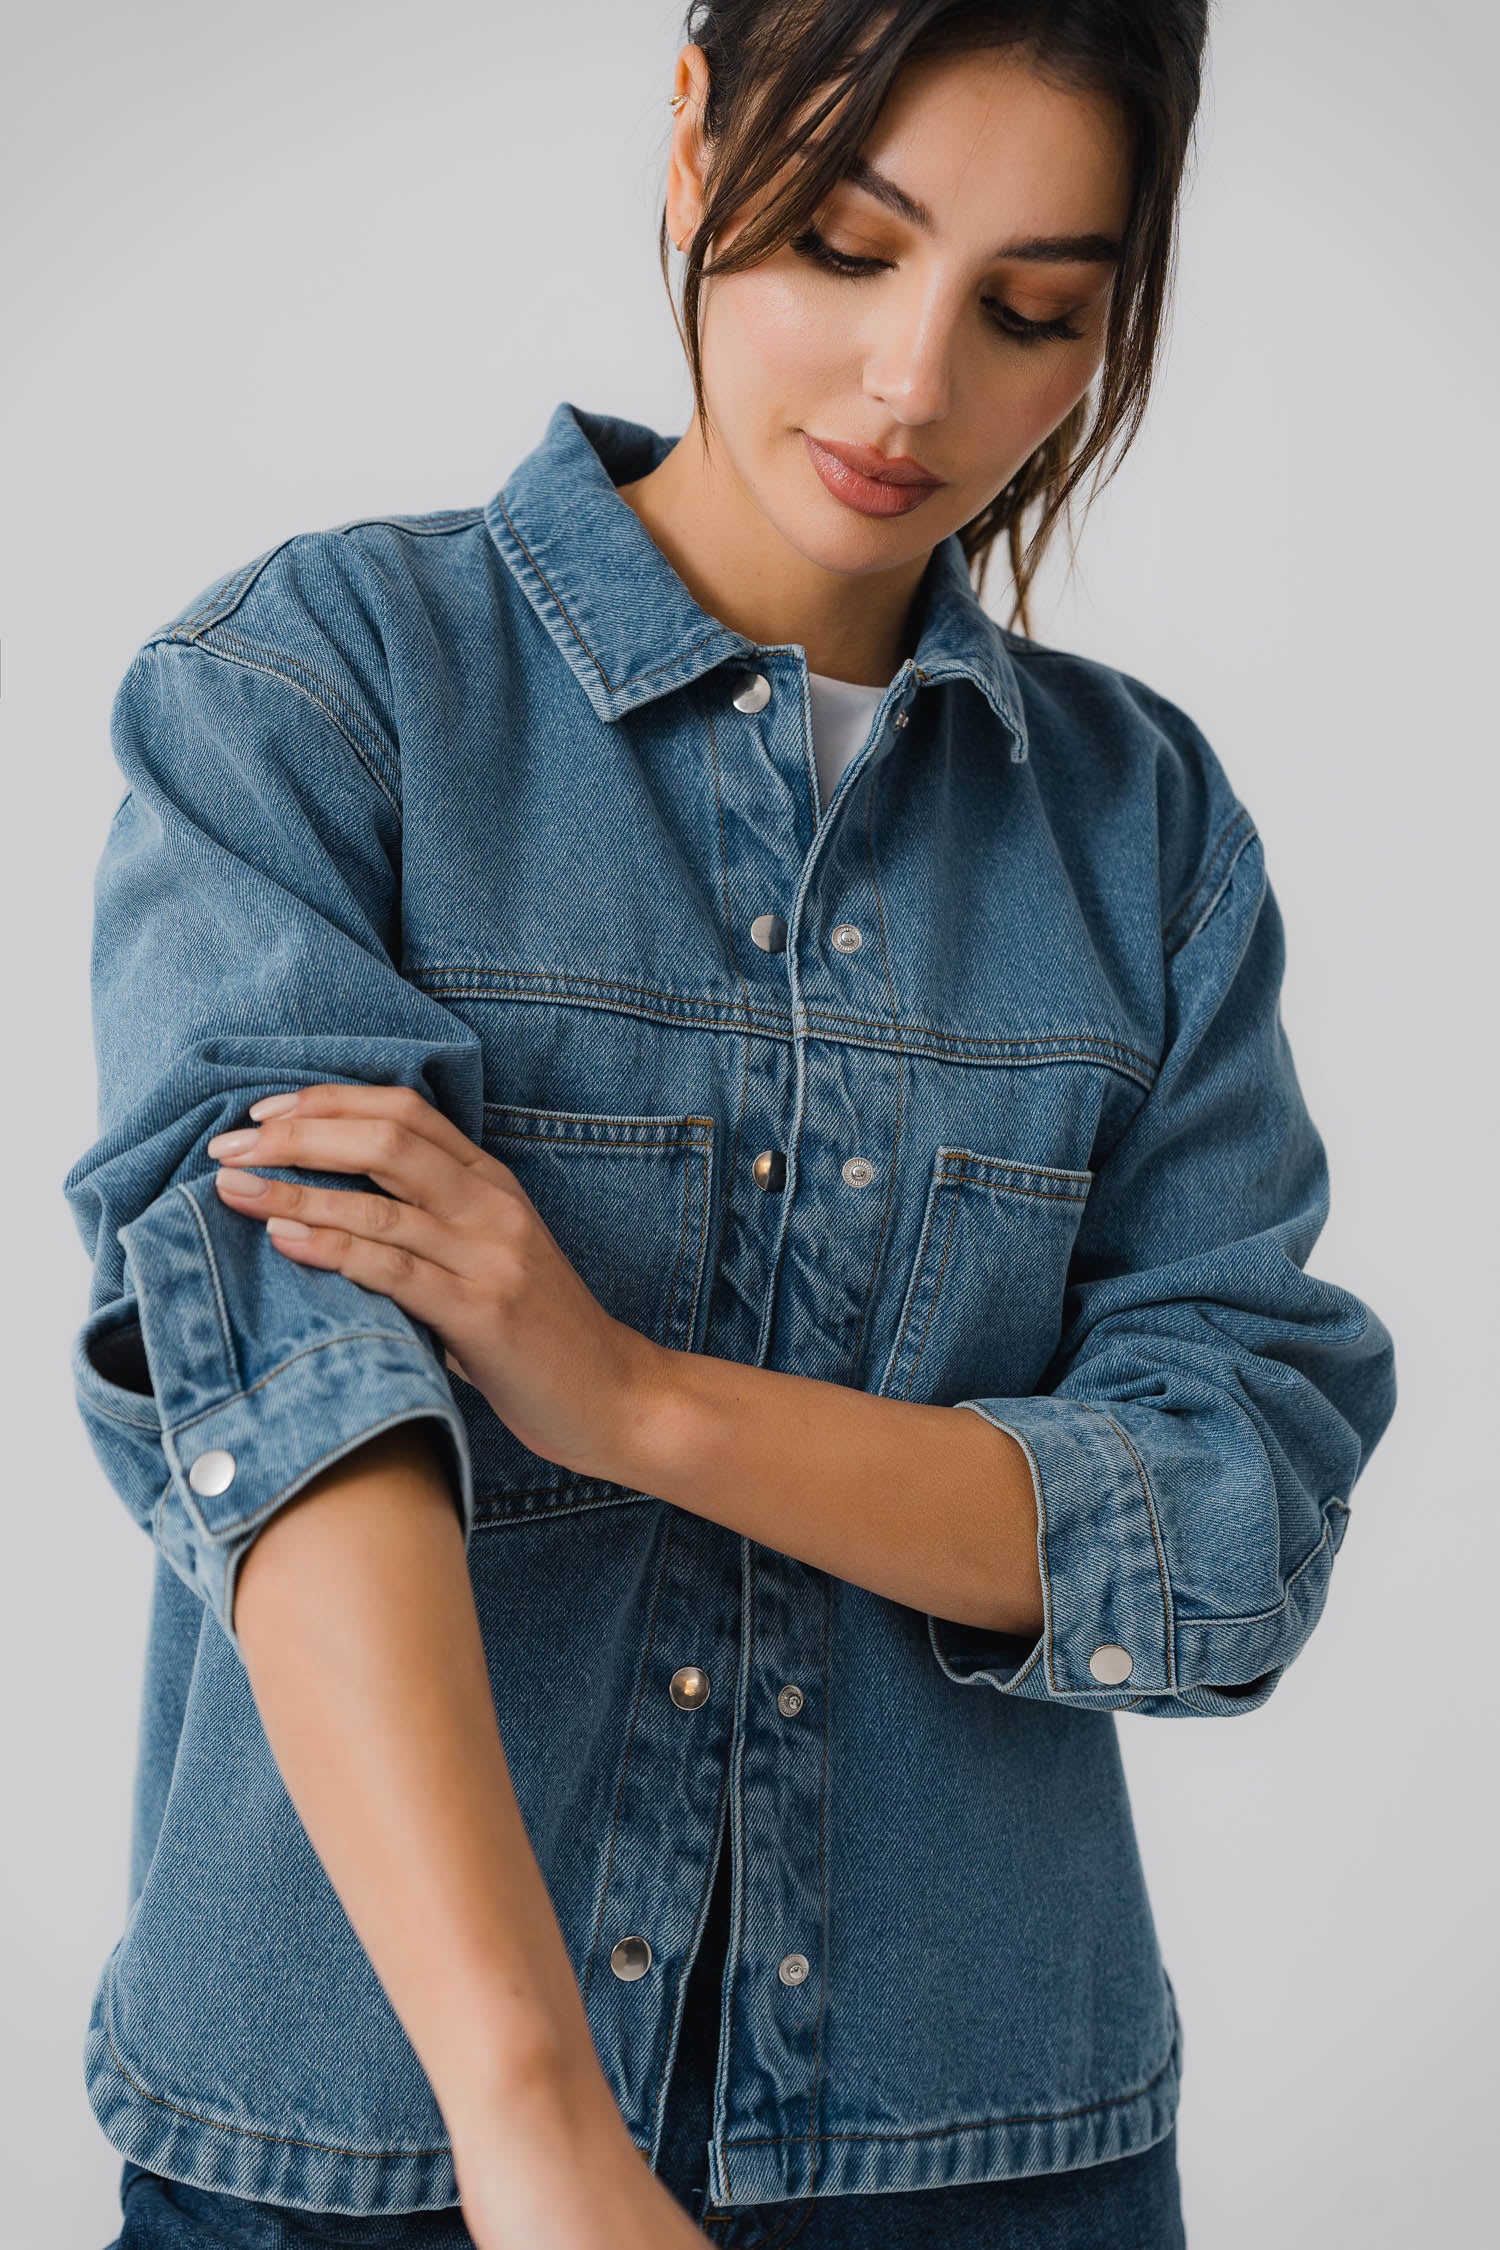 Denim Shirts for Women Long/Roll Up Sleeve Button Down Loose Fit Chambray Jean  Shirt Blouse Tops,Blue,S at Amazon Women's Clothing store